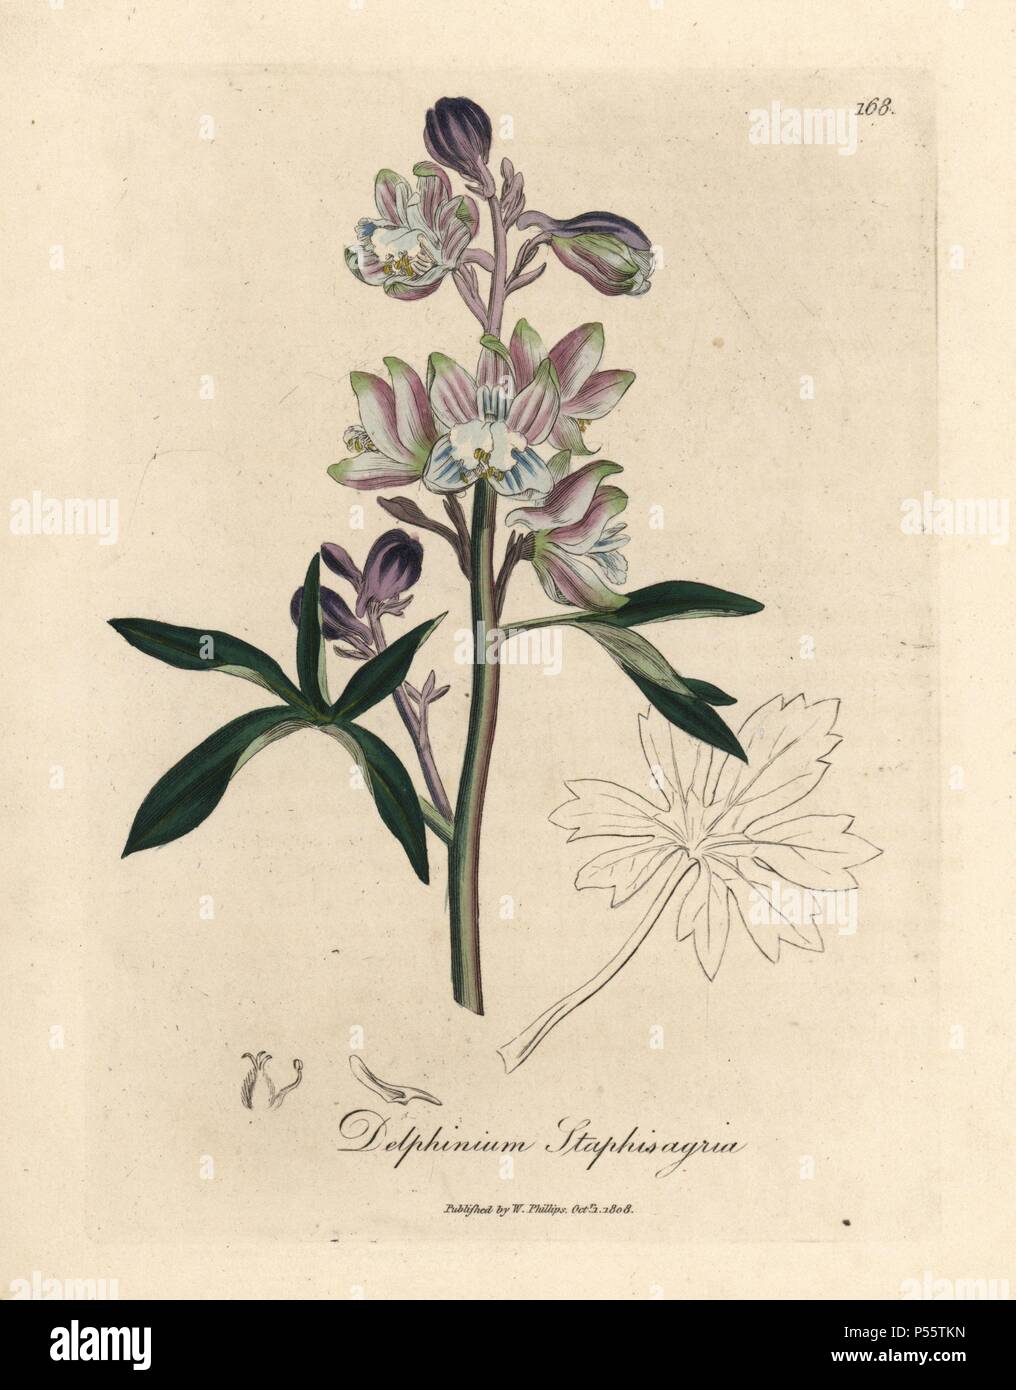 Palmated larkspur or stavesacre, Delphinium staphisagria. Handcoloured copperplate engraving from a botanical illustration by James Sowerby from William Woodville and Sir William Jackson Hooker's 'Medical Botany,' John Bohn, London, 1832. The tireless Sowerby (1757-1822) drew over 2, 500 plants for Smith's mammoth 'English Botany' (1790-1814) and 440 mushrooms for 'Coloured Figures of English Fungi ' (1797) among many other works. Stock Photo